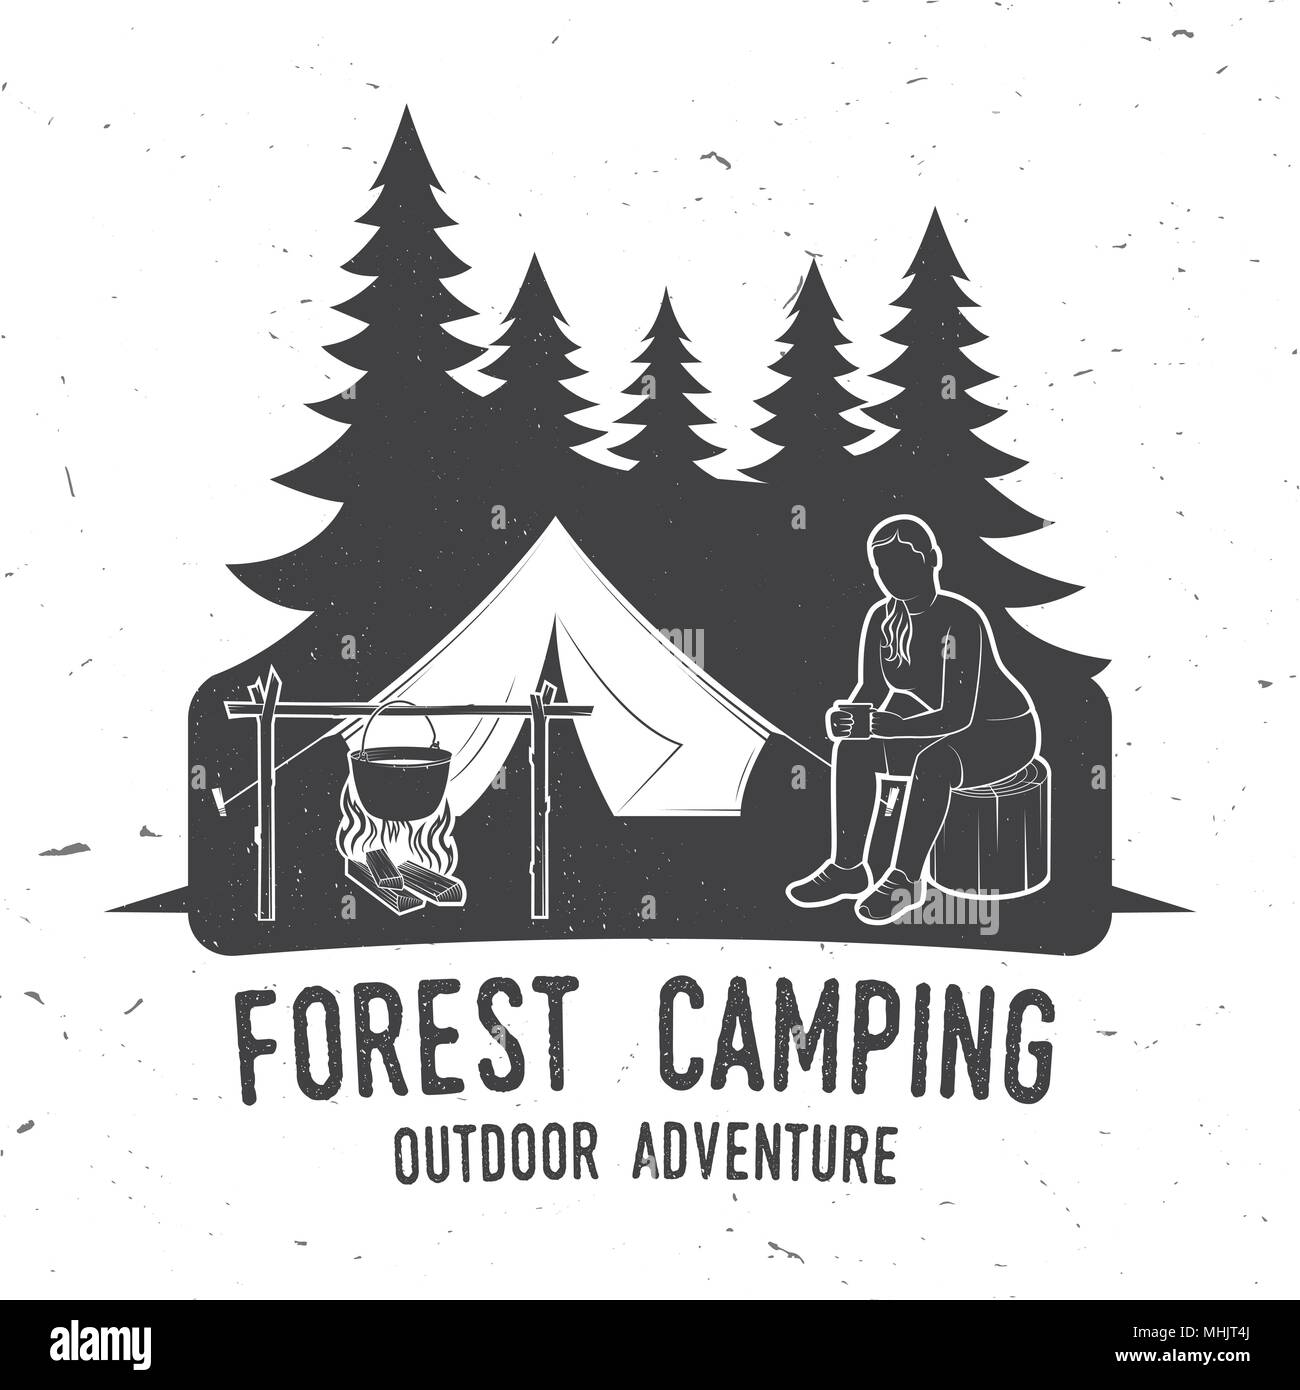 Camping extreme adventure . Vector illustration. Stock Vector